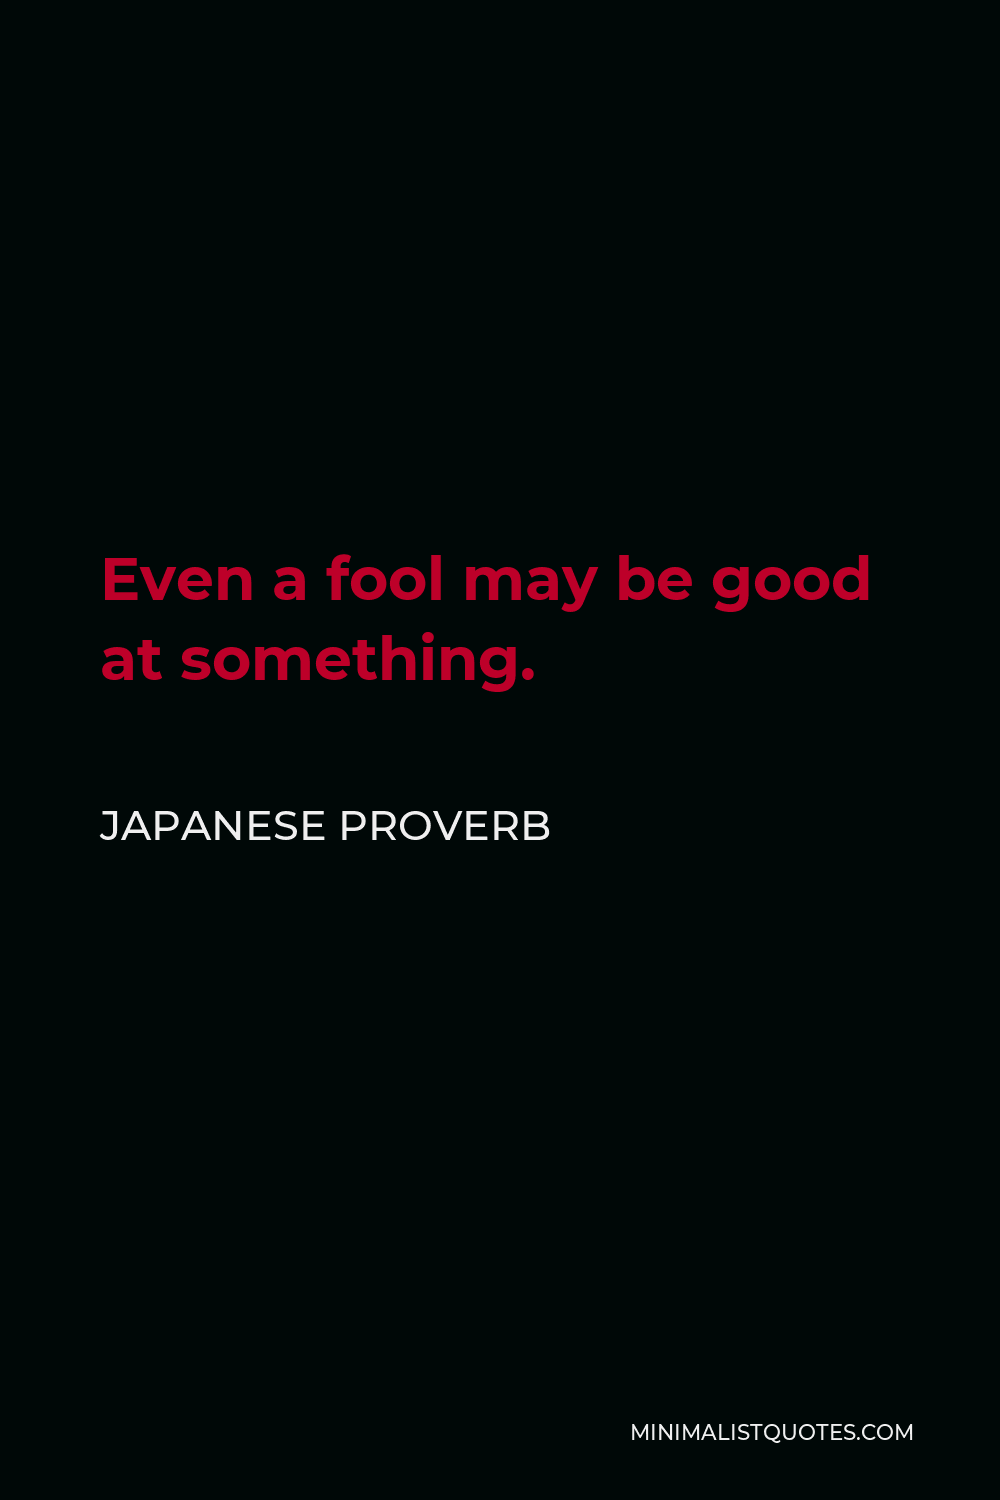 Japanese Proverb Quote - Even a fool may be good at something.